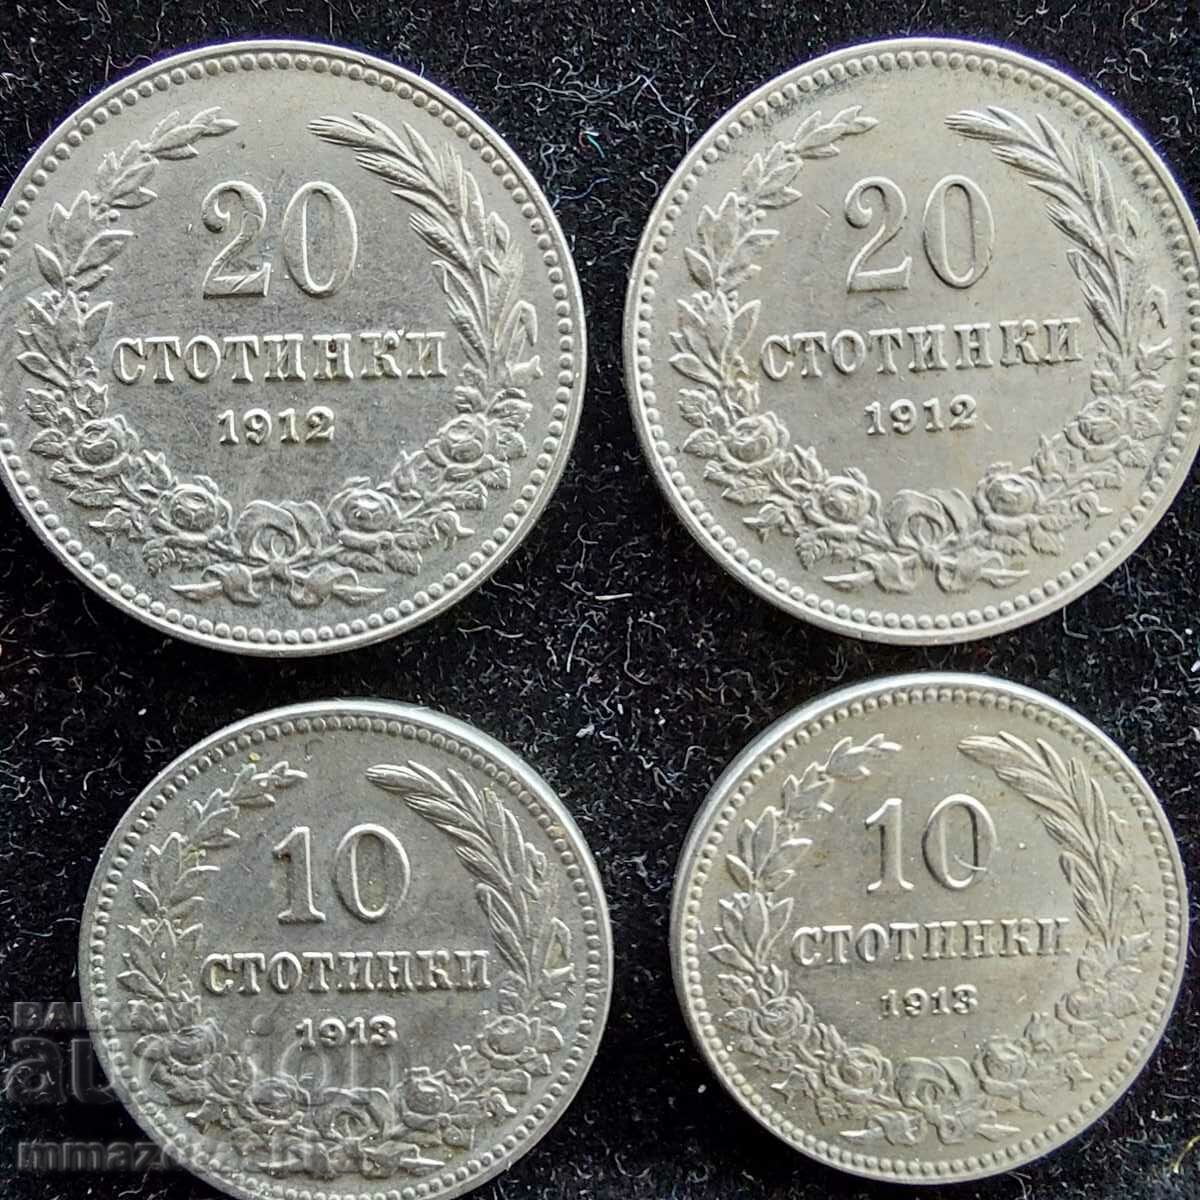 10 and 20 cents, 1912-13